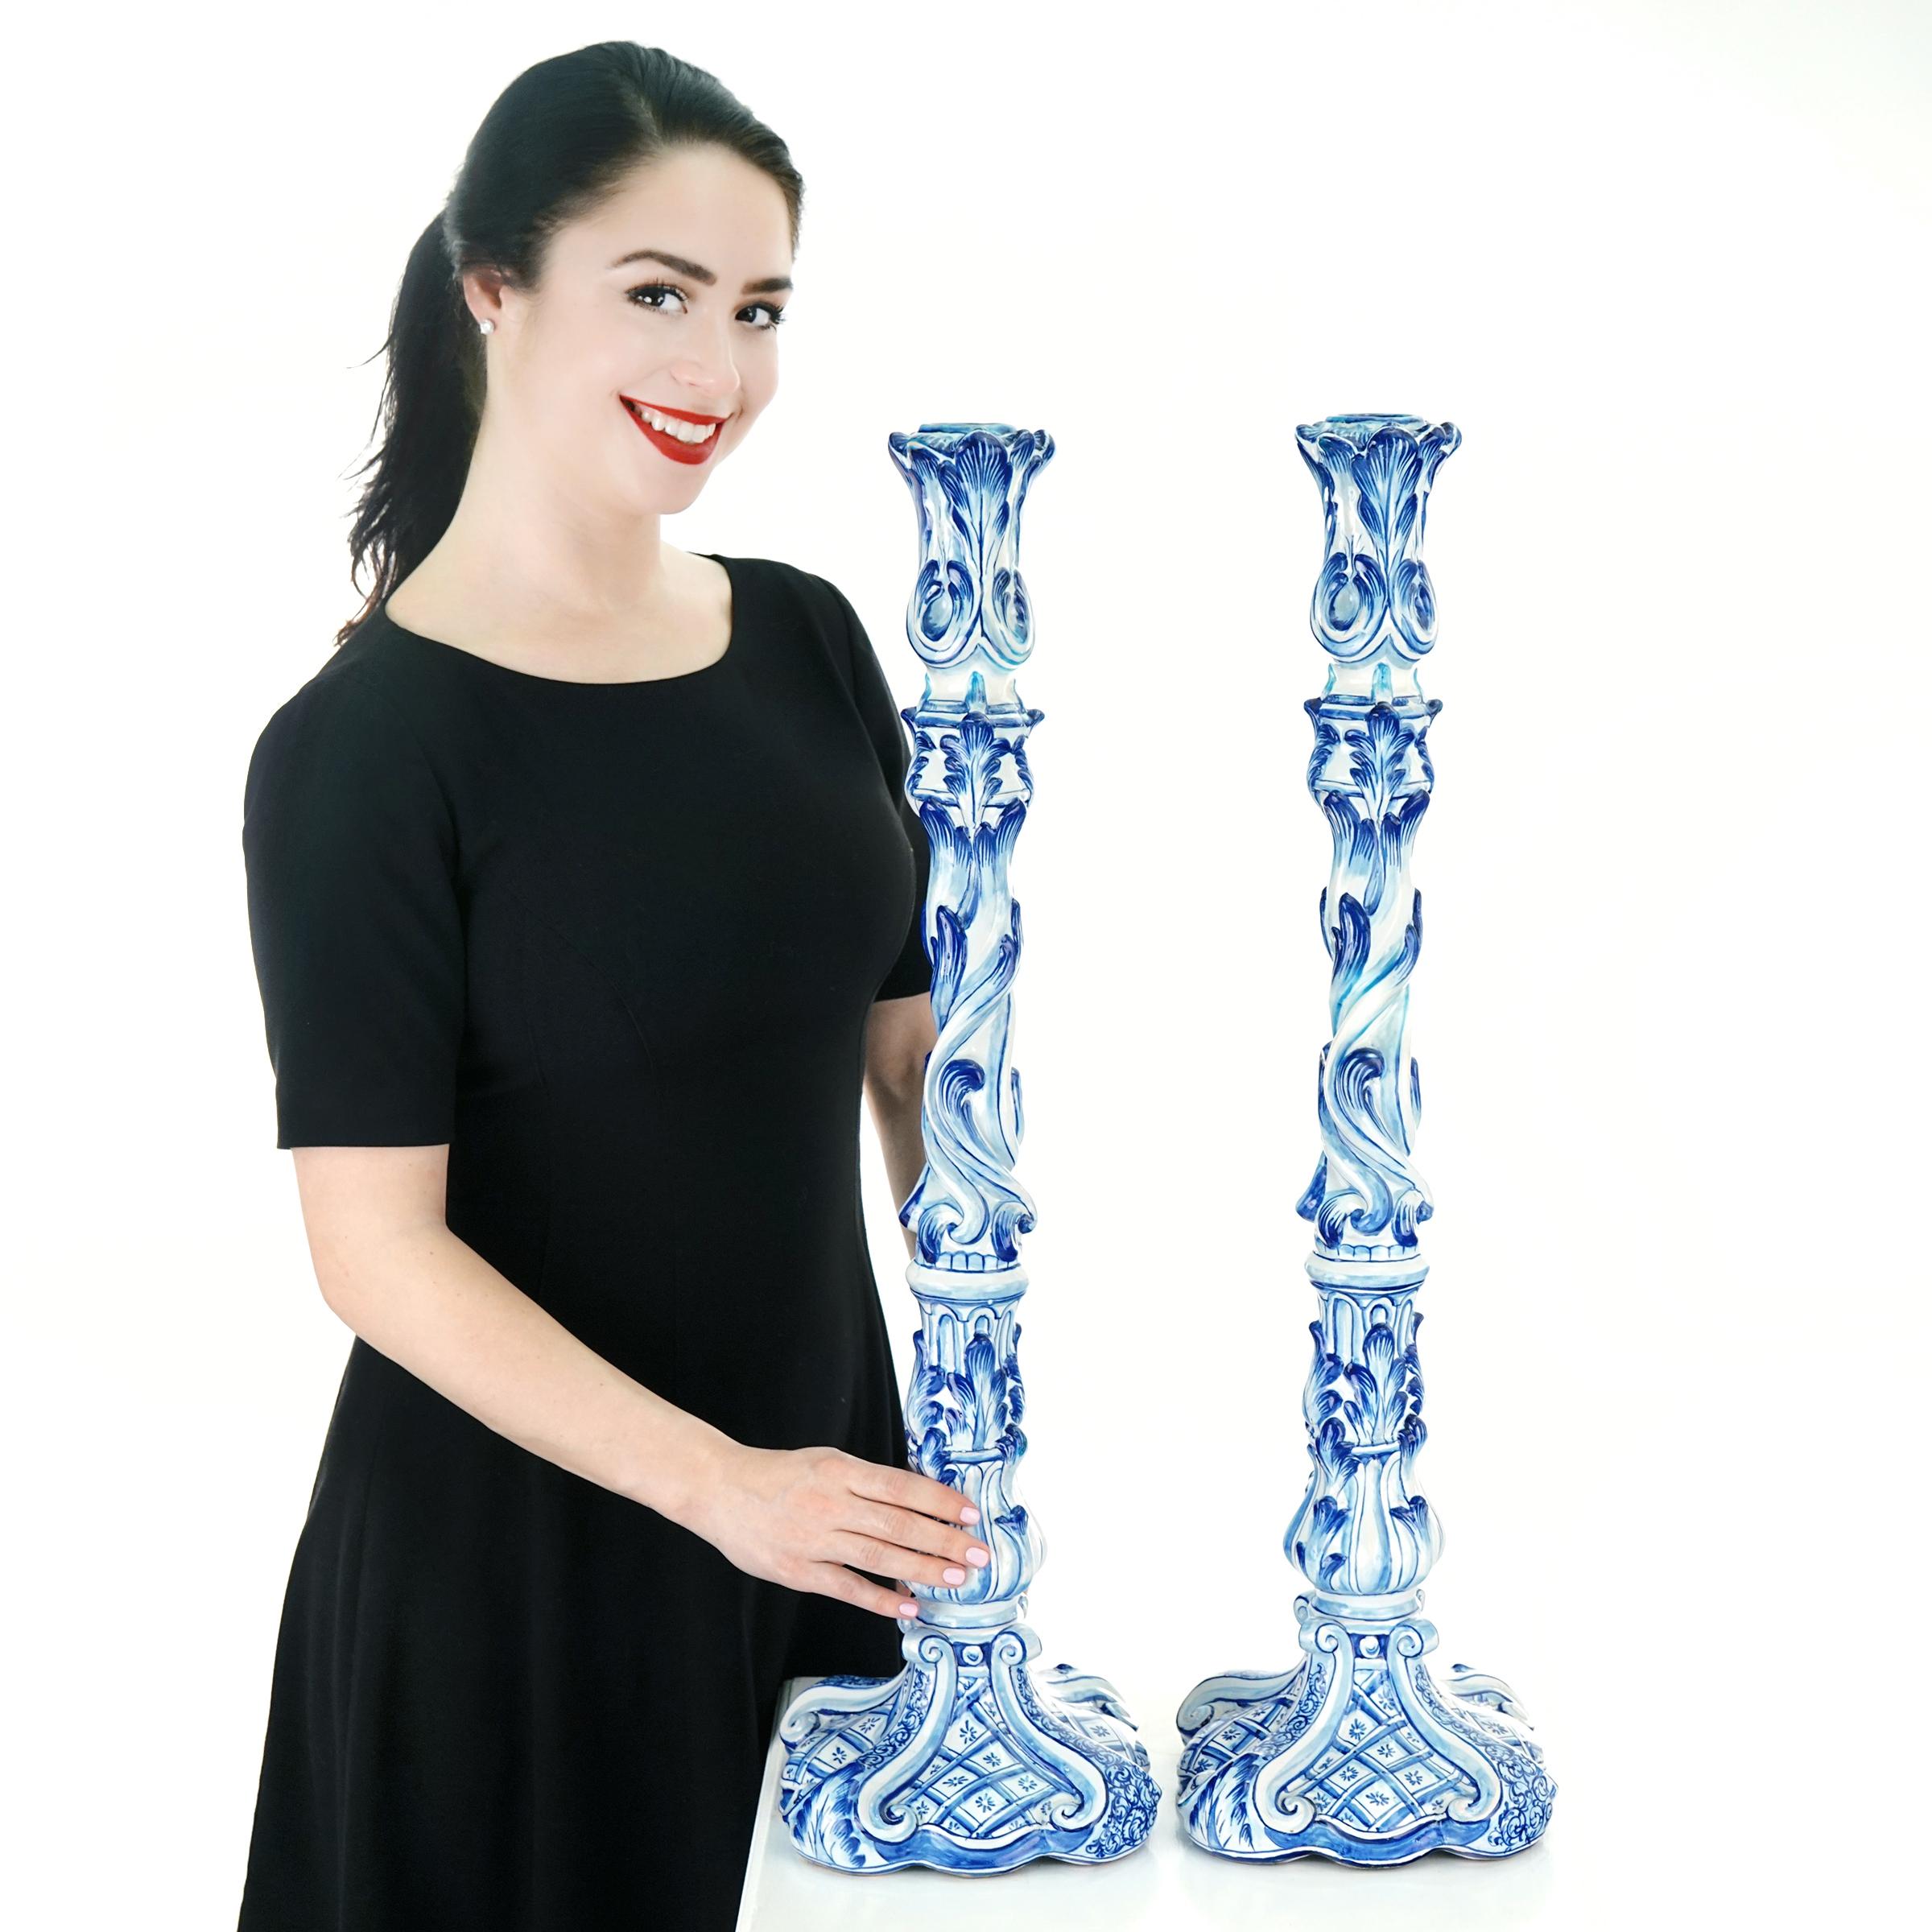 Circa 1913, France.  These stunning 28 inch tall blue and white faience candlesticks have an incredible country-meets-neoclassical look. Perfect for any décor, their style presages Deco while their scale is distinctly medieval. Excellent